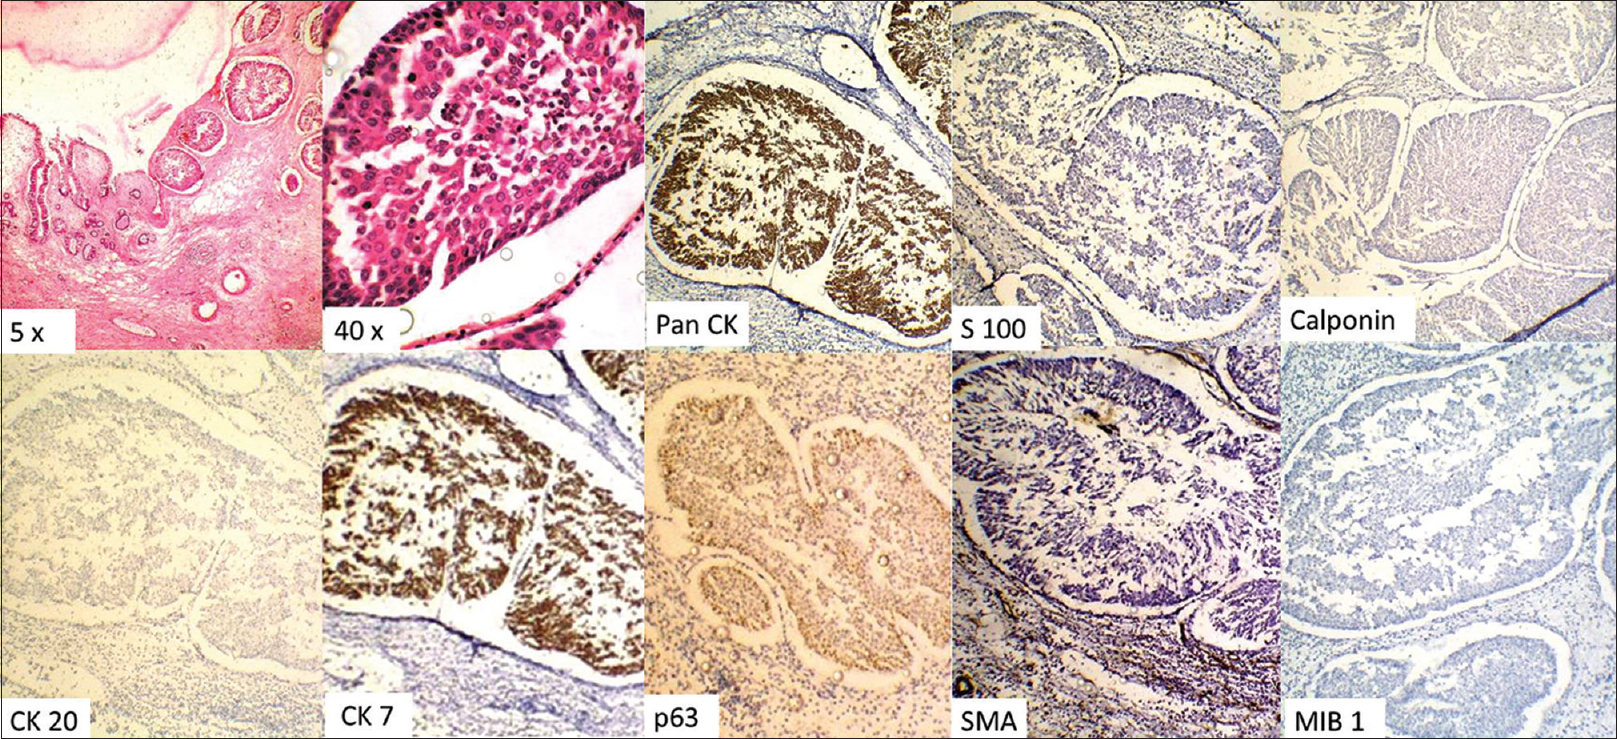 Composite photomicrograph showing hematoxylin and eosin stained section of the hamartomas glandular proliferation into the stroma, with the epithelial cells being positive for Pan cytokeratin and cytokeratin 7 and negative for S100, calponin, cytokeratin 20, and smooth muscle actin. The basal is seen to be positive for p63. The MIB-1 proliferative index is low